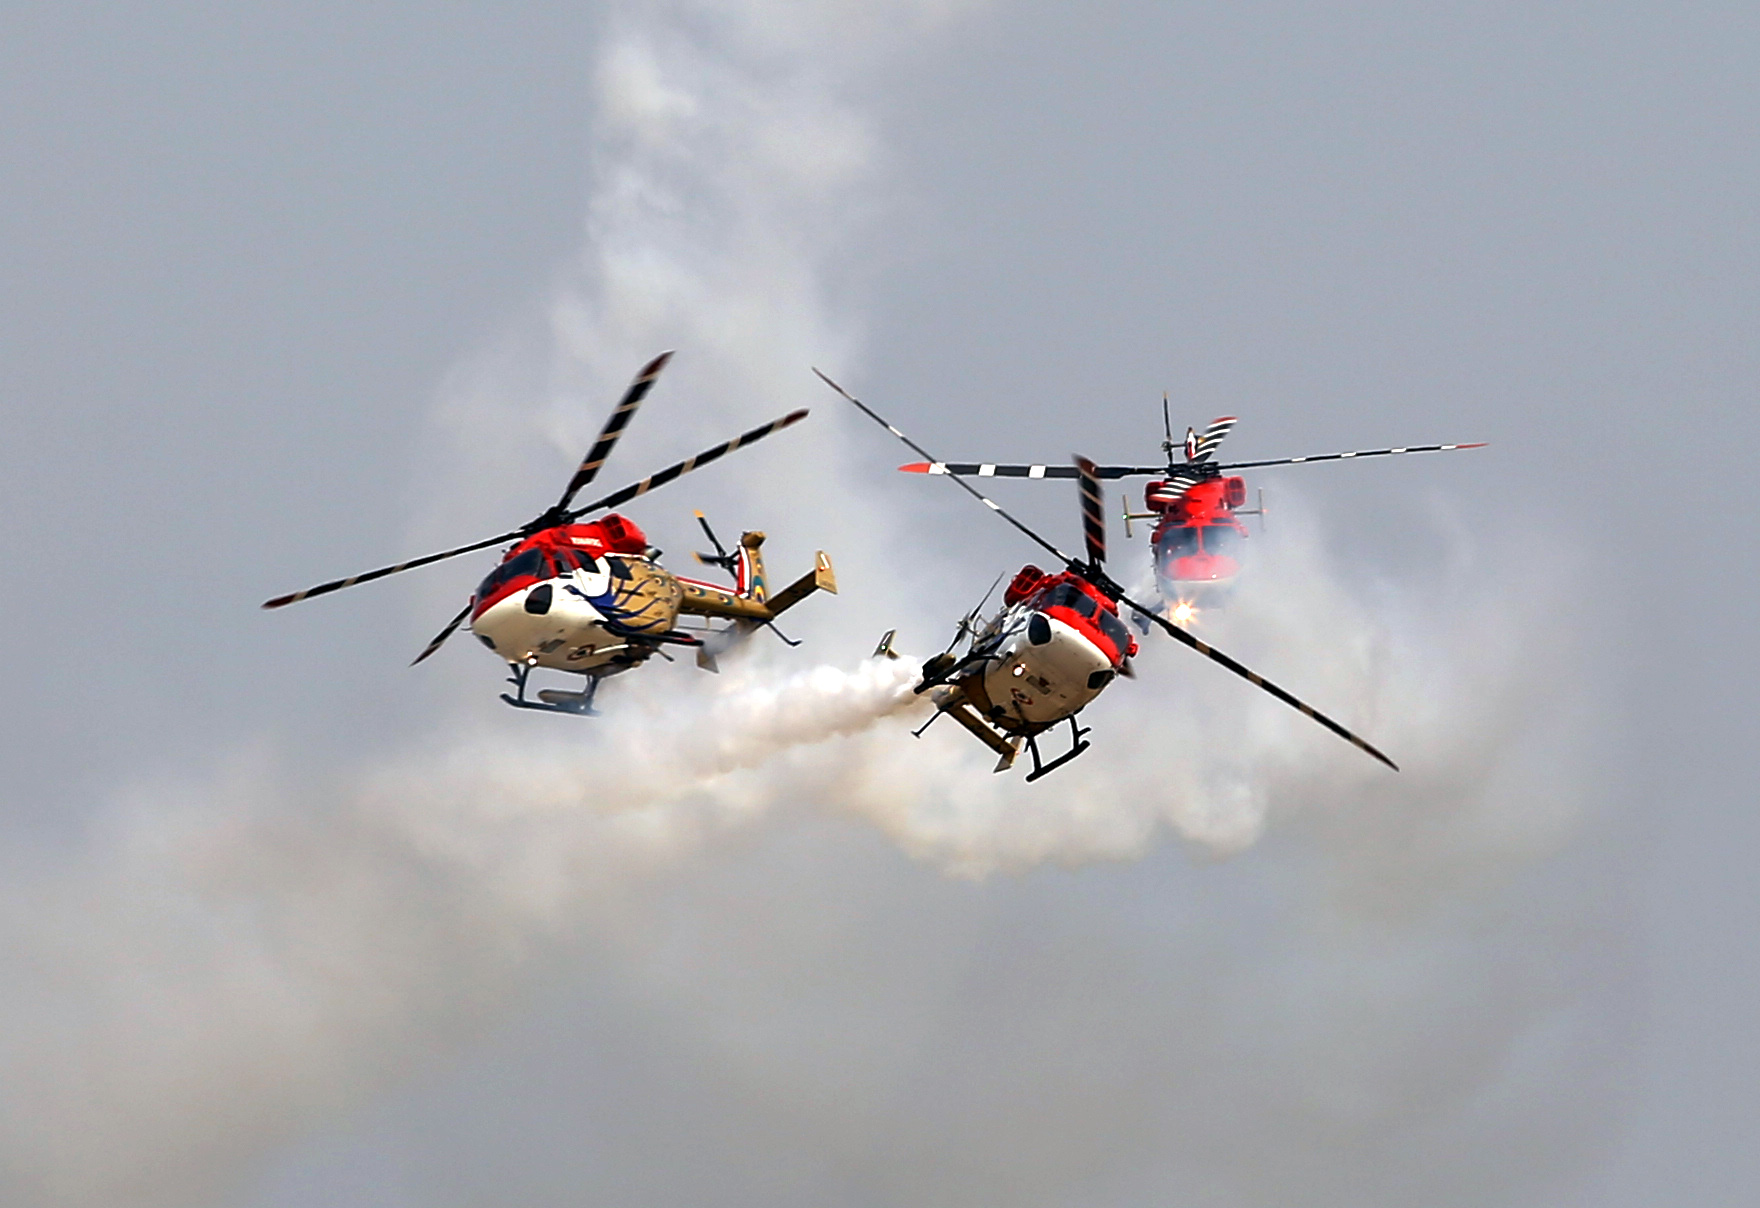 Glimpses-of-Indian-Air-Force-Day-2014-PHOTO-11.jpg